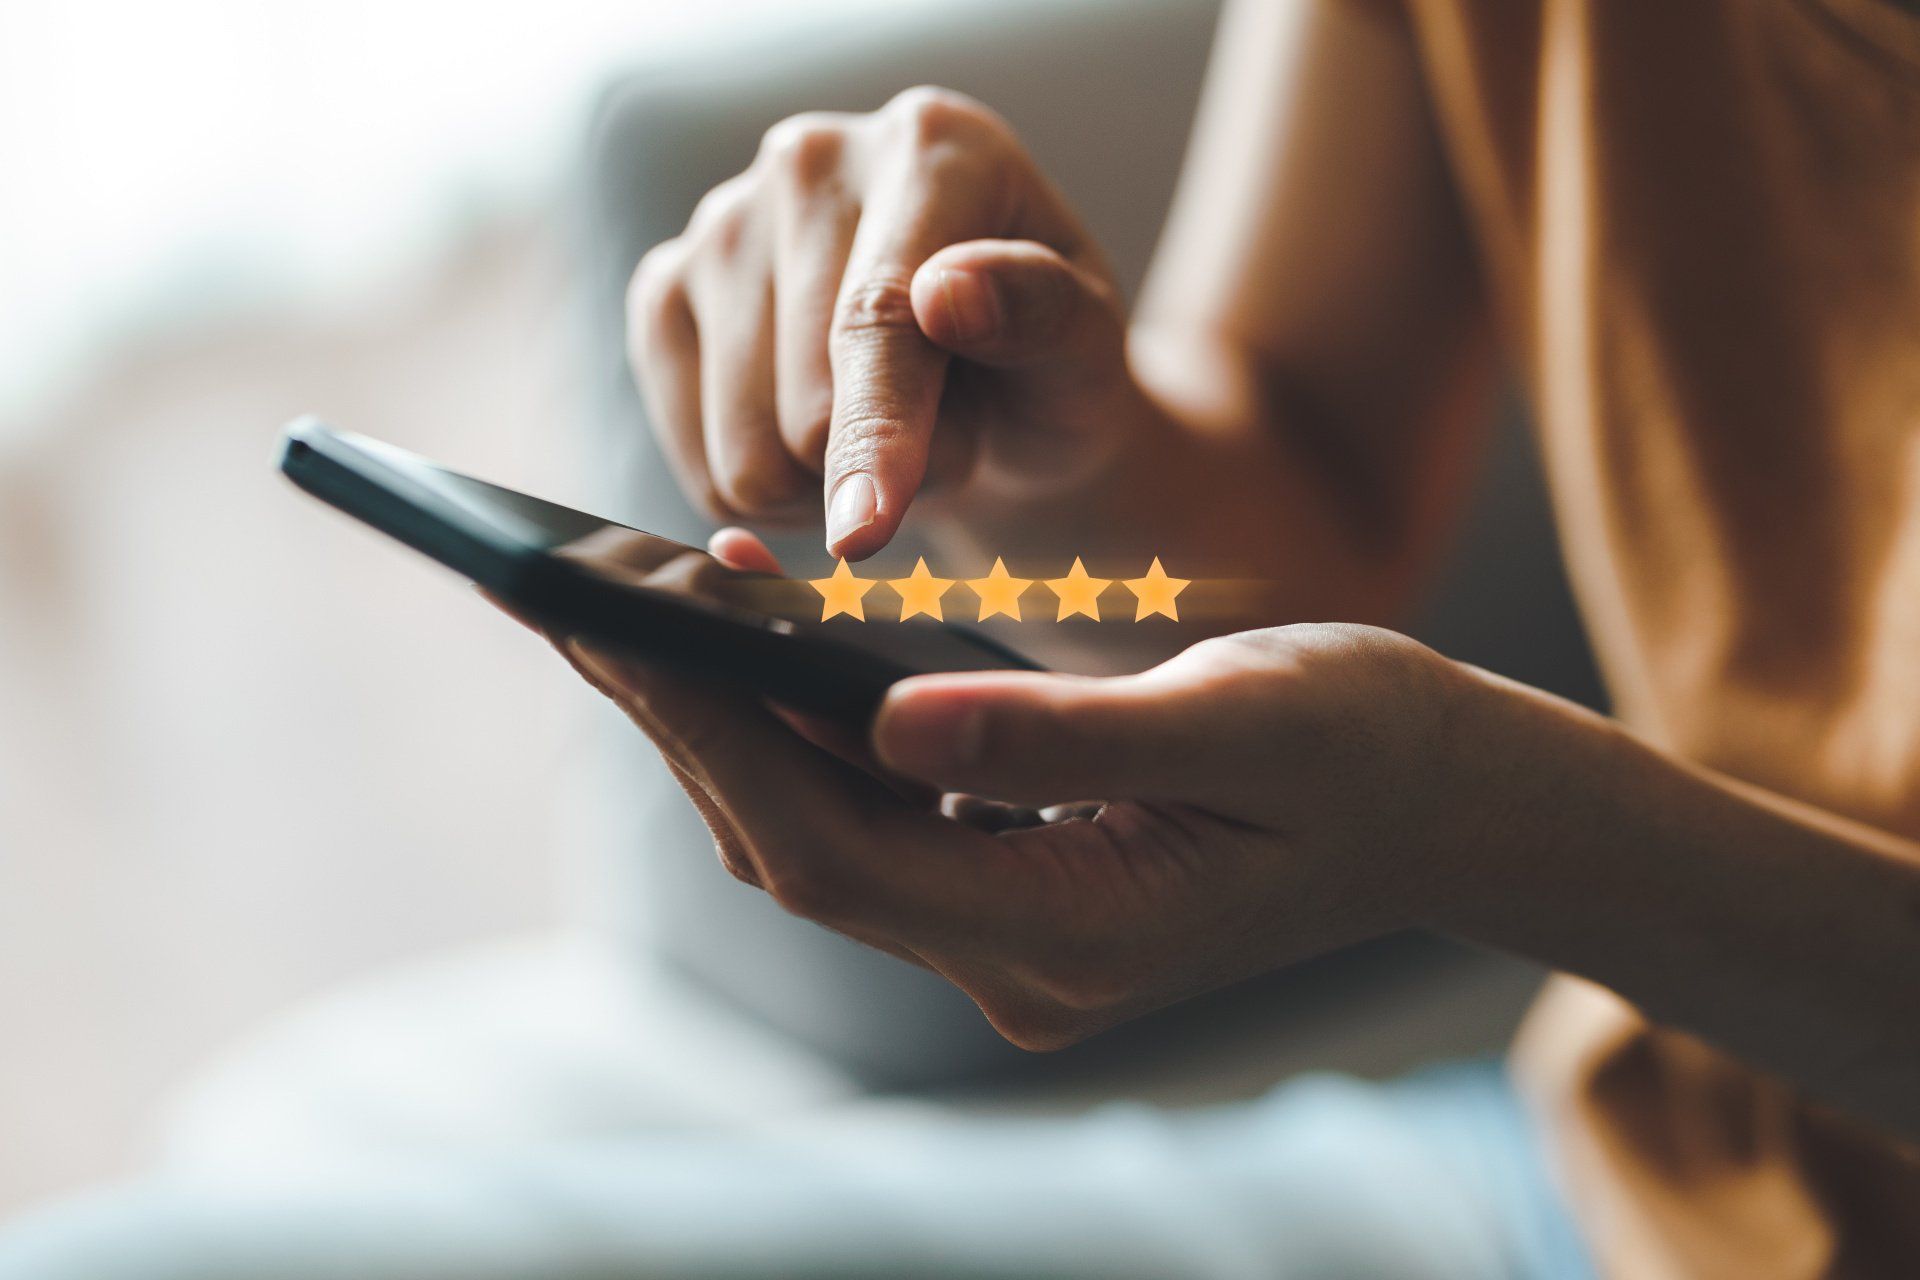 Woman's hands leaving 5 star review on phone